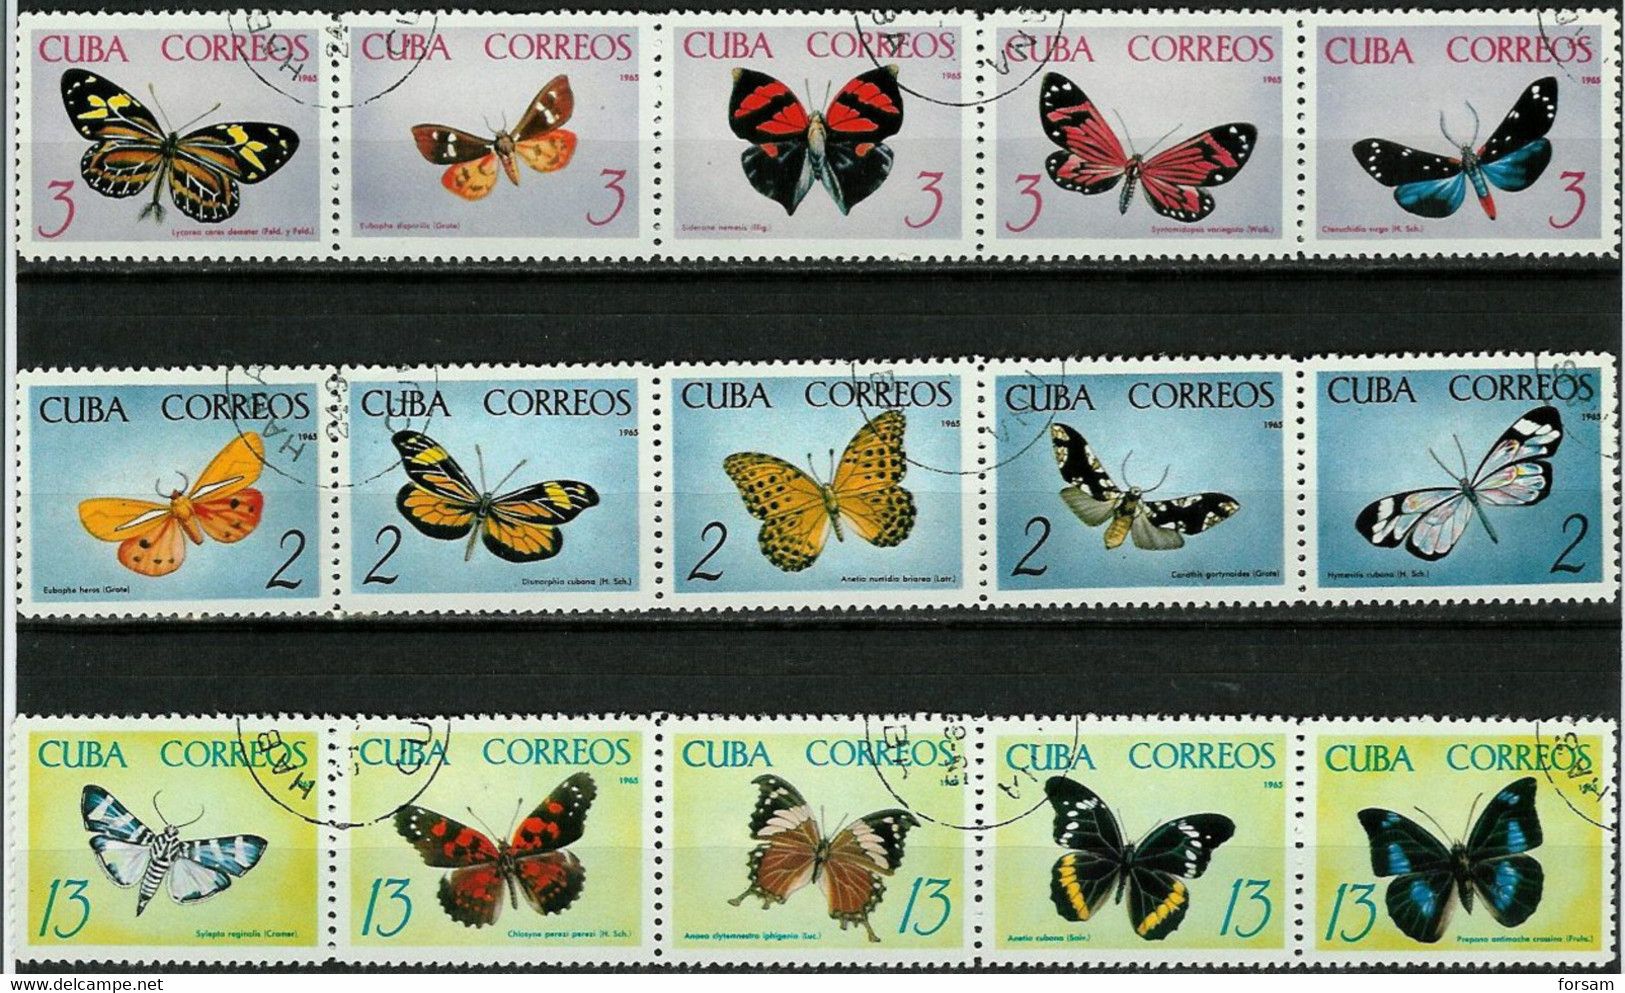 CUBA..1965..Michel # 1058-1072.(3 Strips )..used..MiCV - 5.50 Euro. - Used Stamps